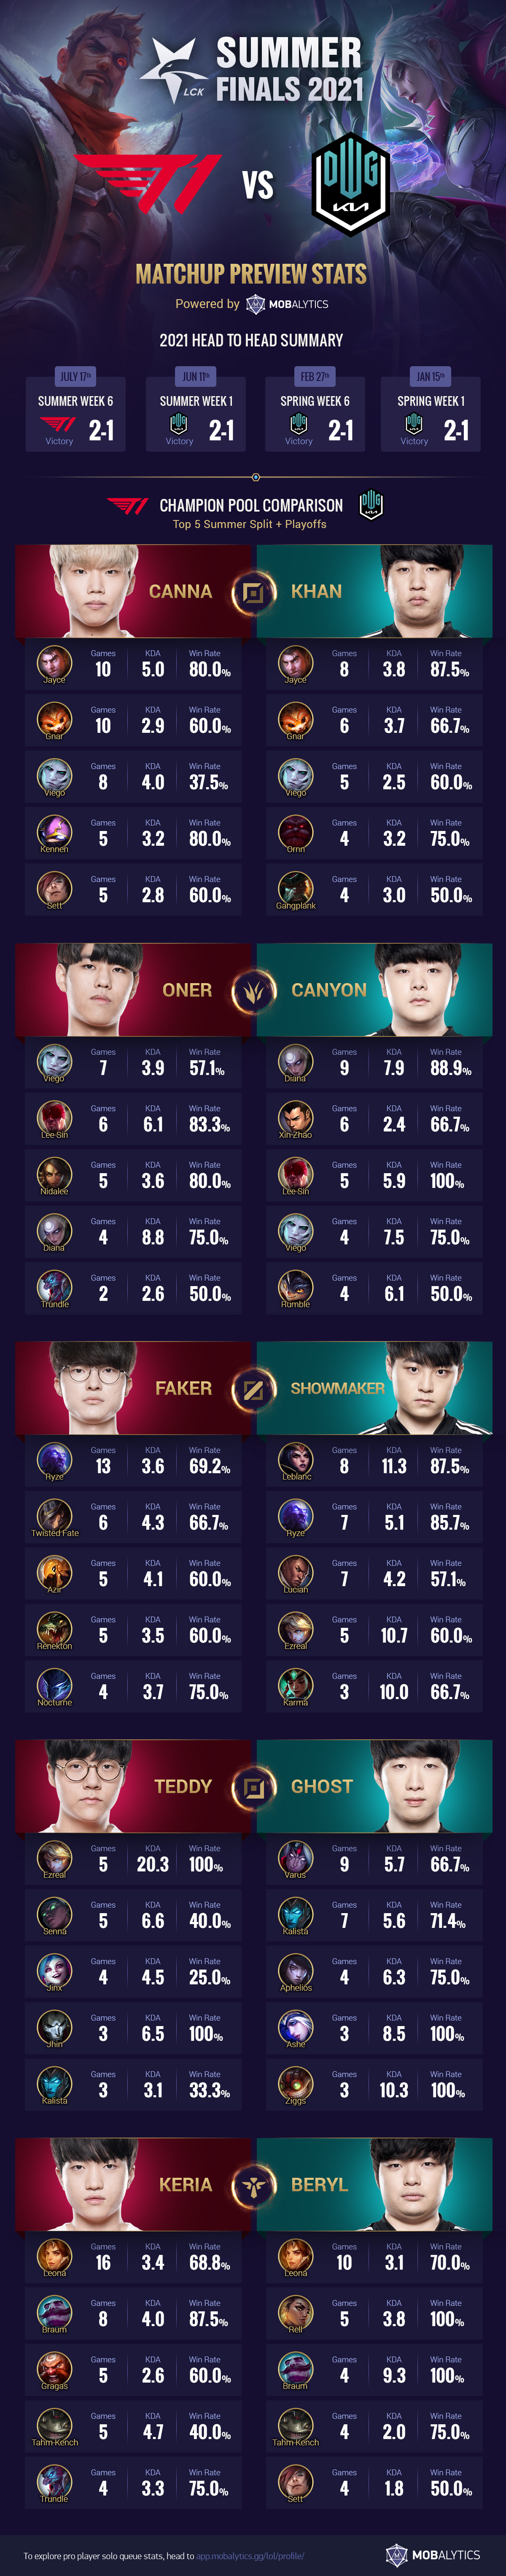 2021 LCK Summer Finals: T1 vs DWG KIA – Matchup Preview Stats (Infographic)